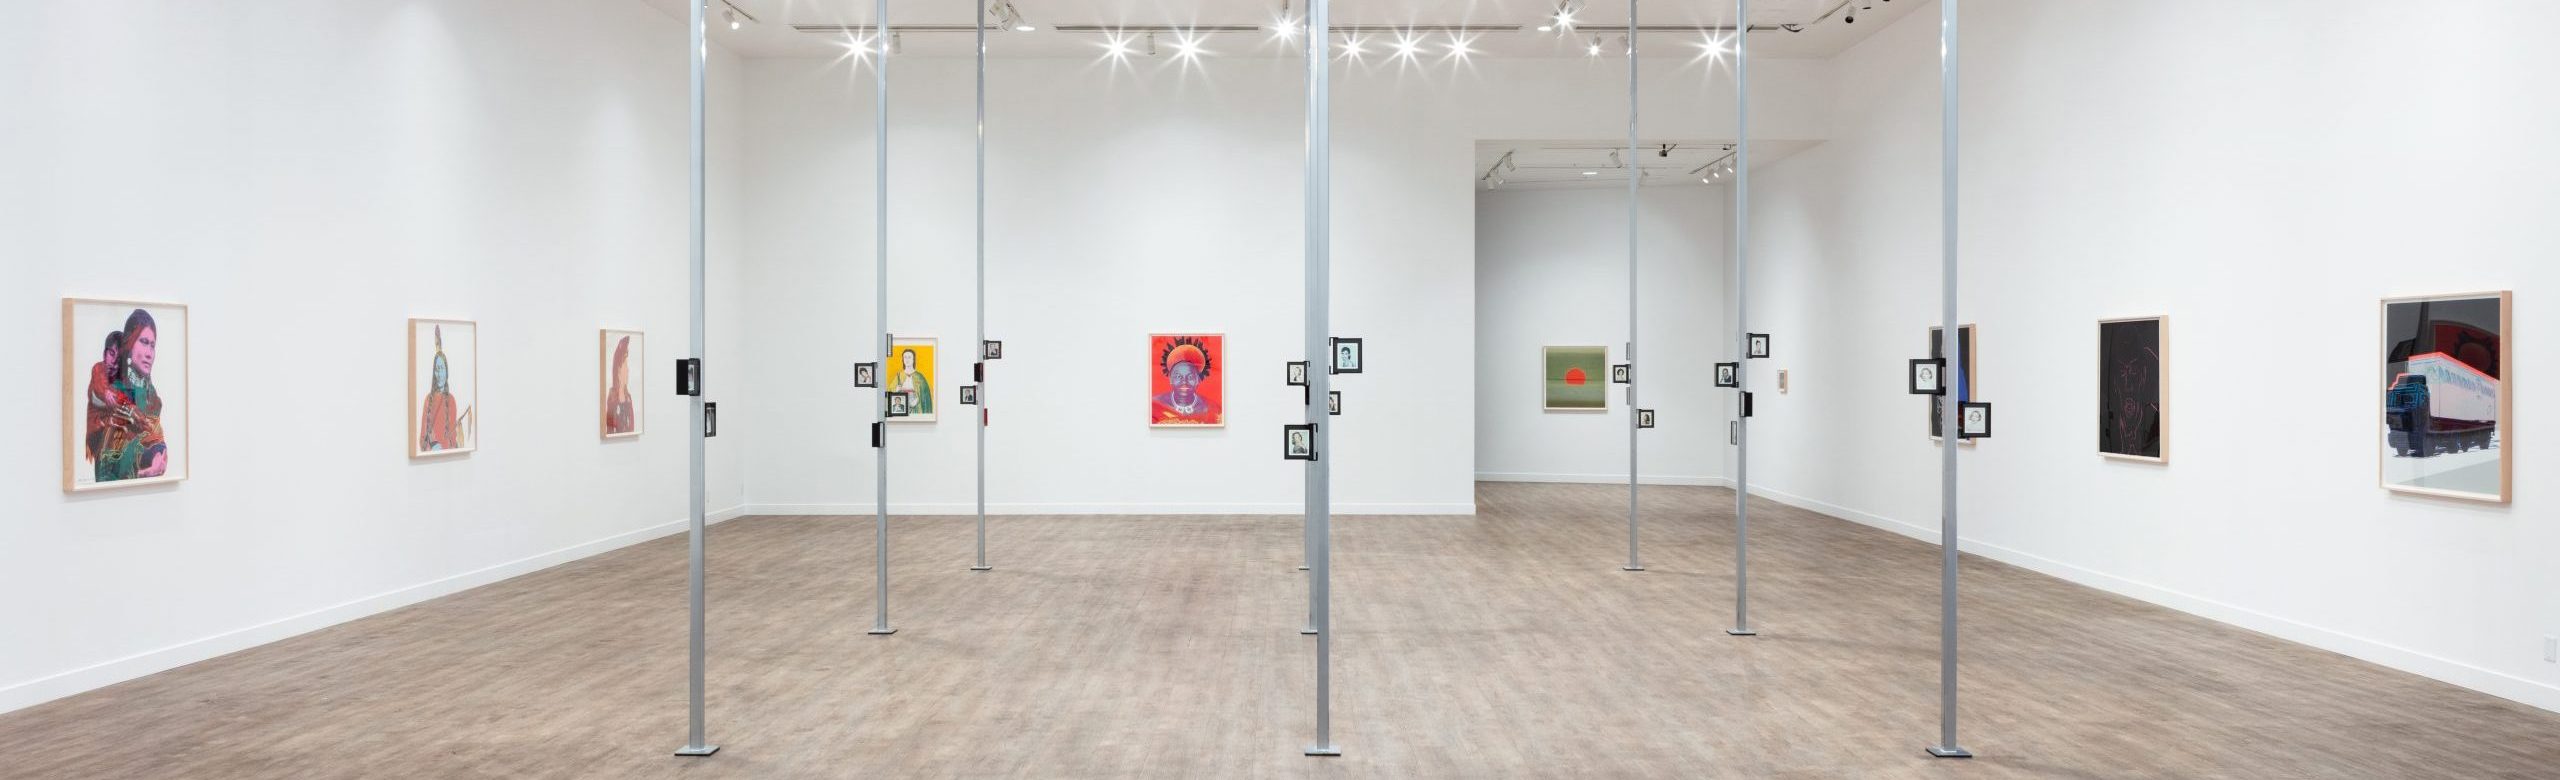 A spacious art gallery interior hosting an Andy Warhol exhibition, featuring a varied collection of framed artworks on white walls and a series of standing informational placards, under a modern lighting system.